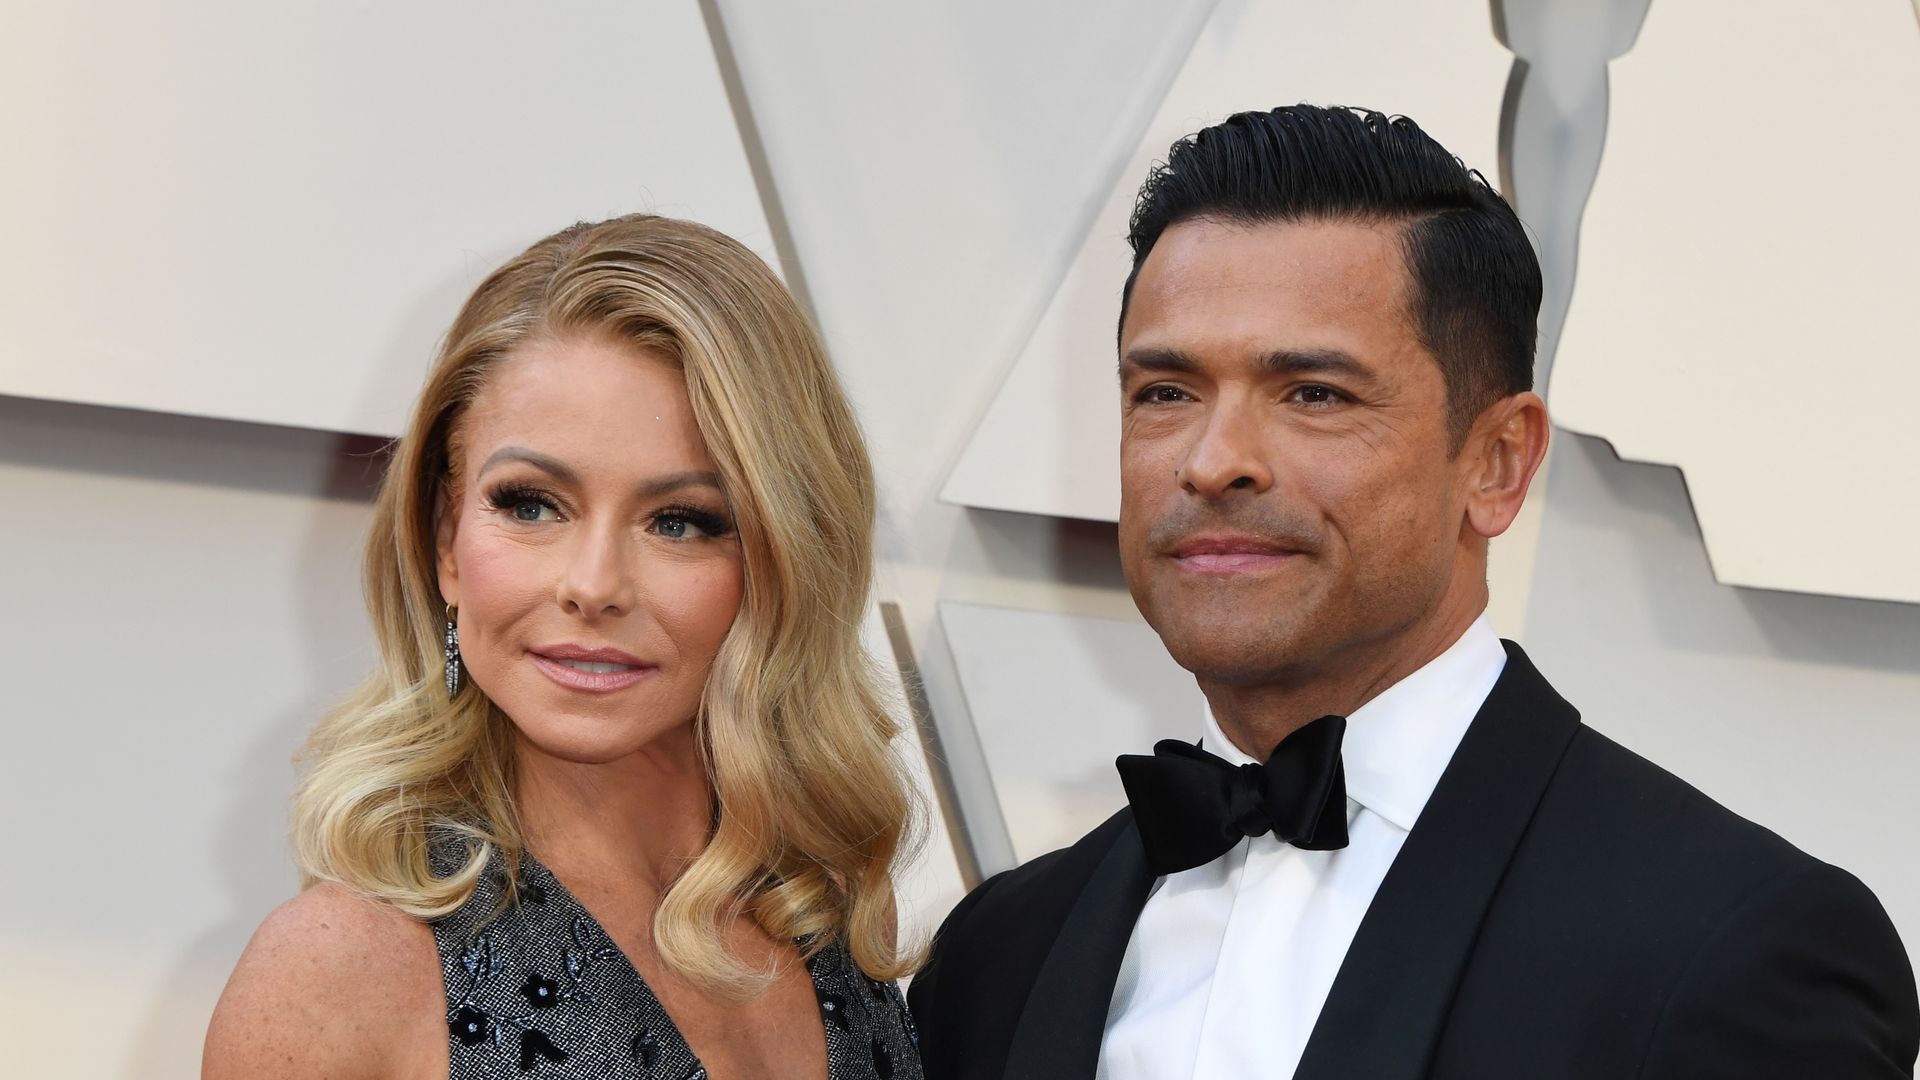 Kelly Ripa, 53, sizzles in sequins in most show-stopping wedding guest dress to date